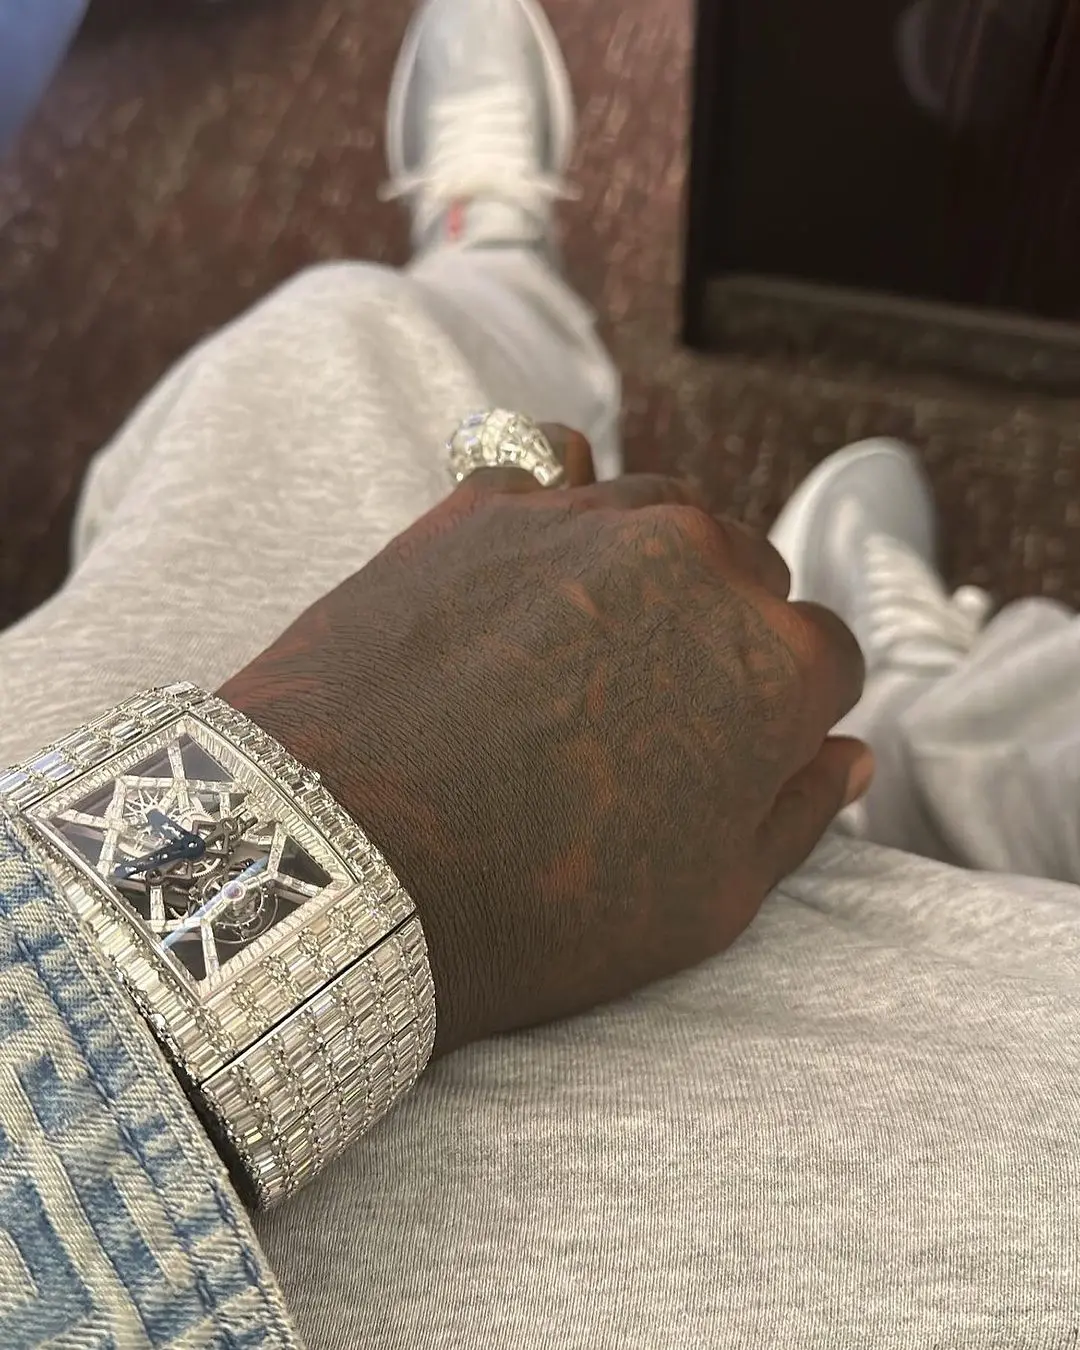 Let's admire the outfit Rick Ross once wore, worth more than $1.5 million, including a watch studded with more than 1,000 diamonds -ltbl